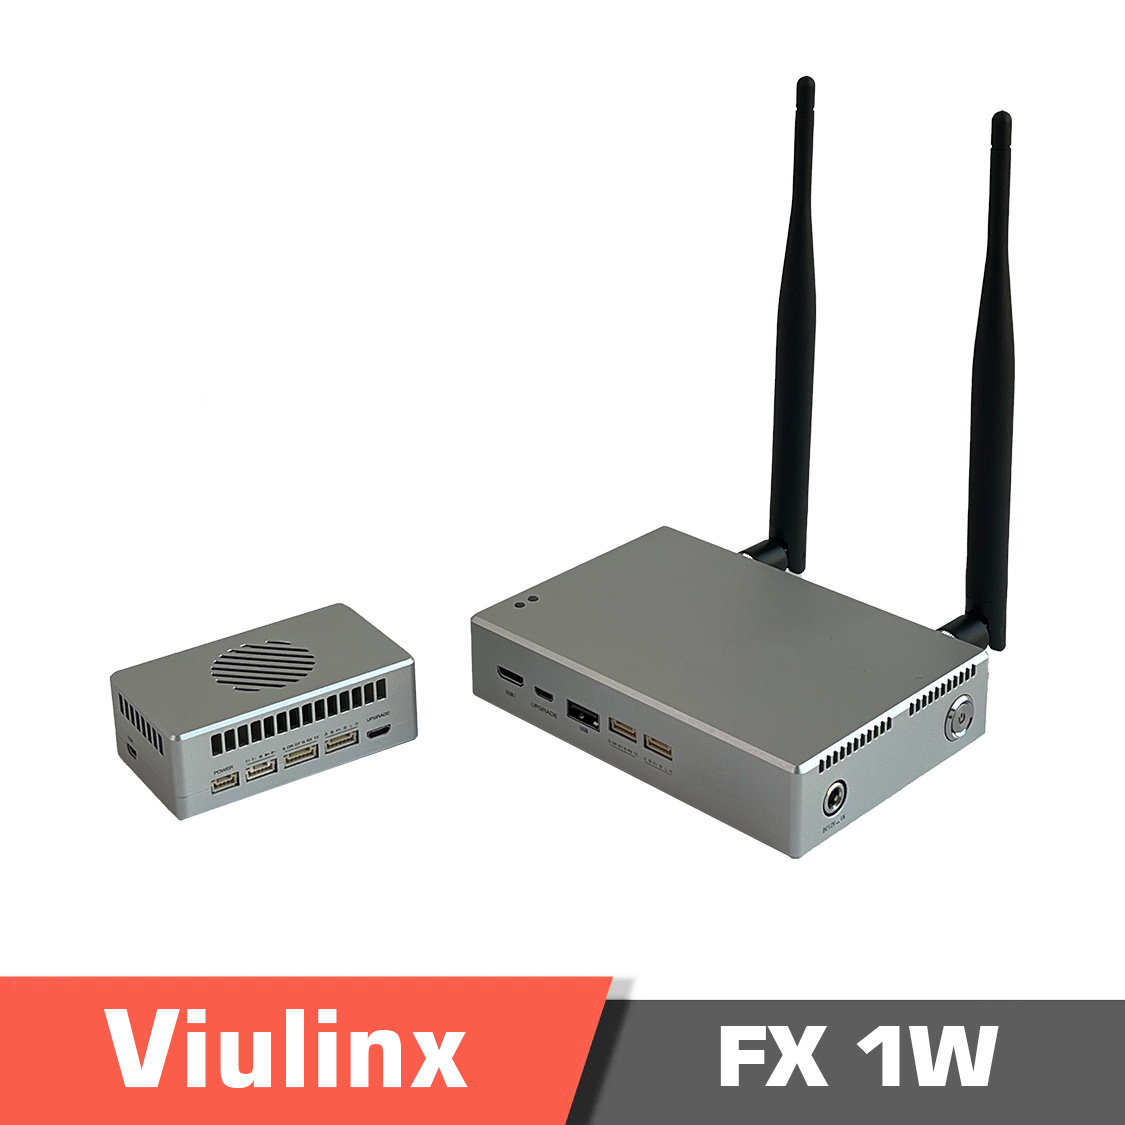 Viulinx - t900 mini datalink,transmission system,dual-link transmission system,remote control,data transmission,short distance,900mhz frequency band,industrial grade,nlos data transmission,for uav and robot,multi indicators,telemetry,dual link transmission system,data link,radio rc,1w transmission power,30dbm transmission power,1w datalink,30dbm datalink - motionew - 2